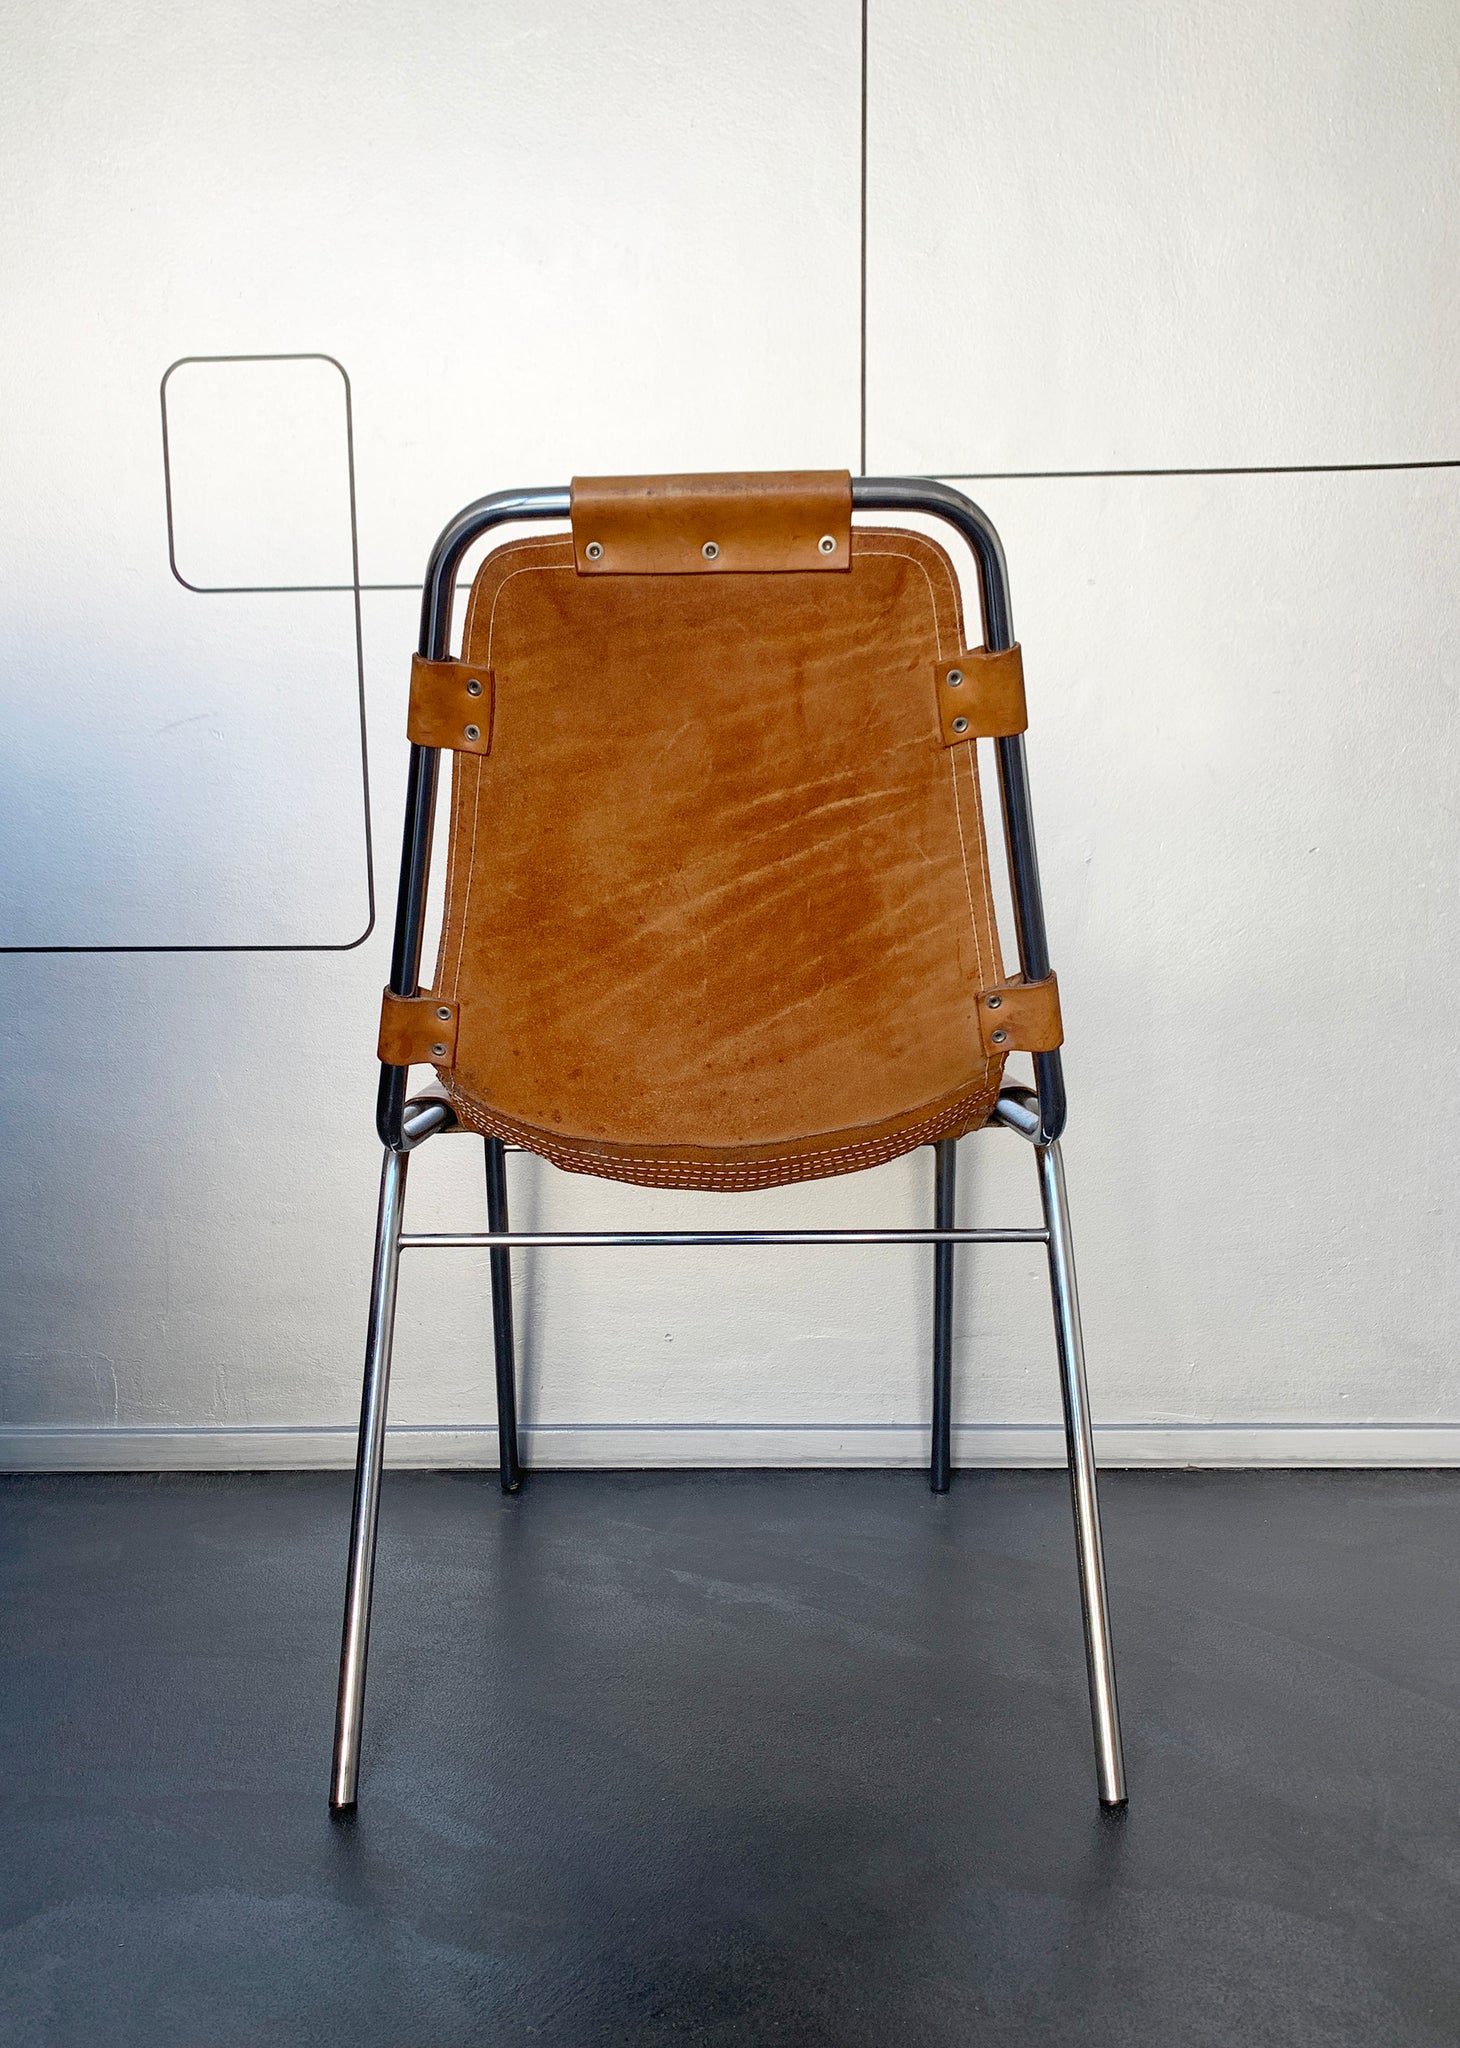 Charlotte Perriand Les Arcs Chairs — counter-space